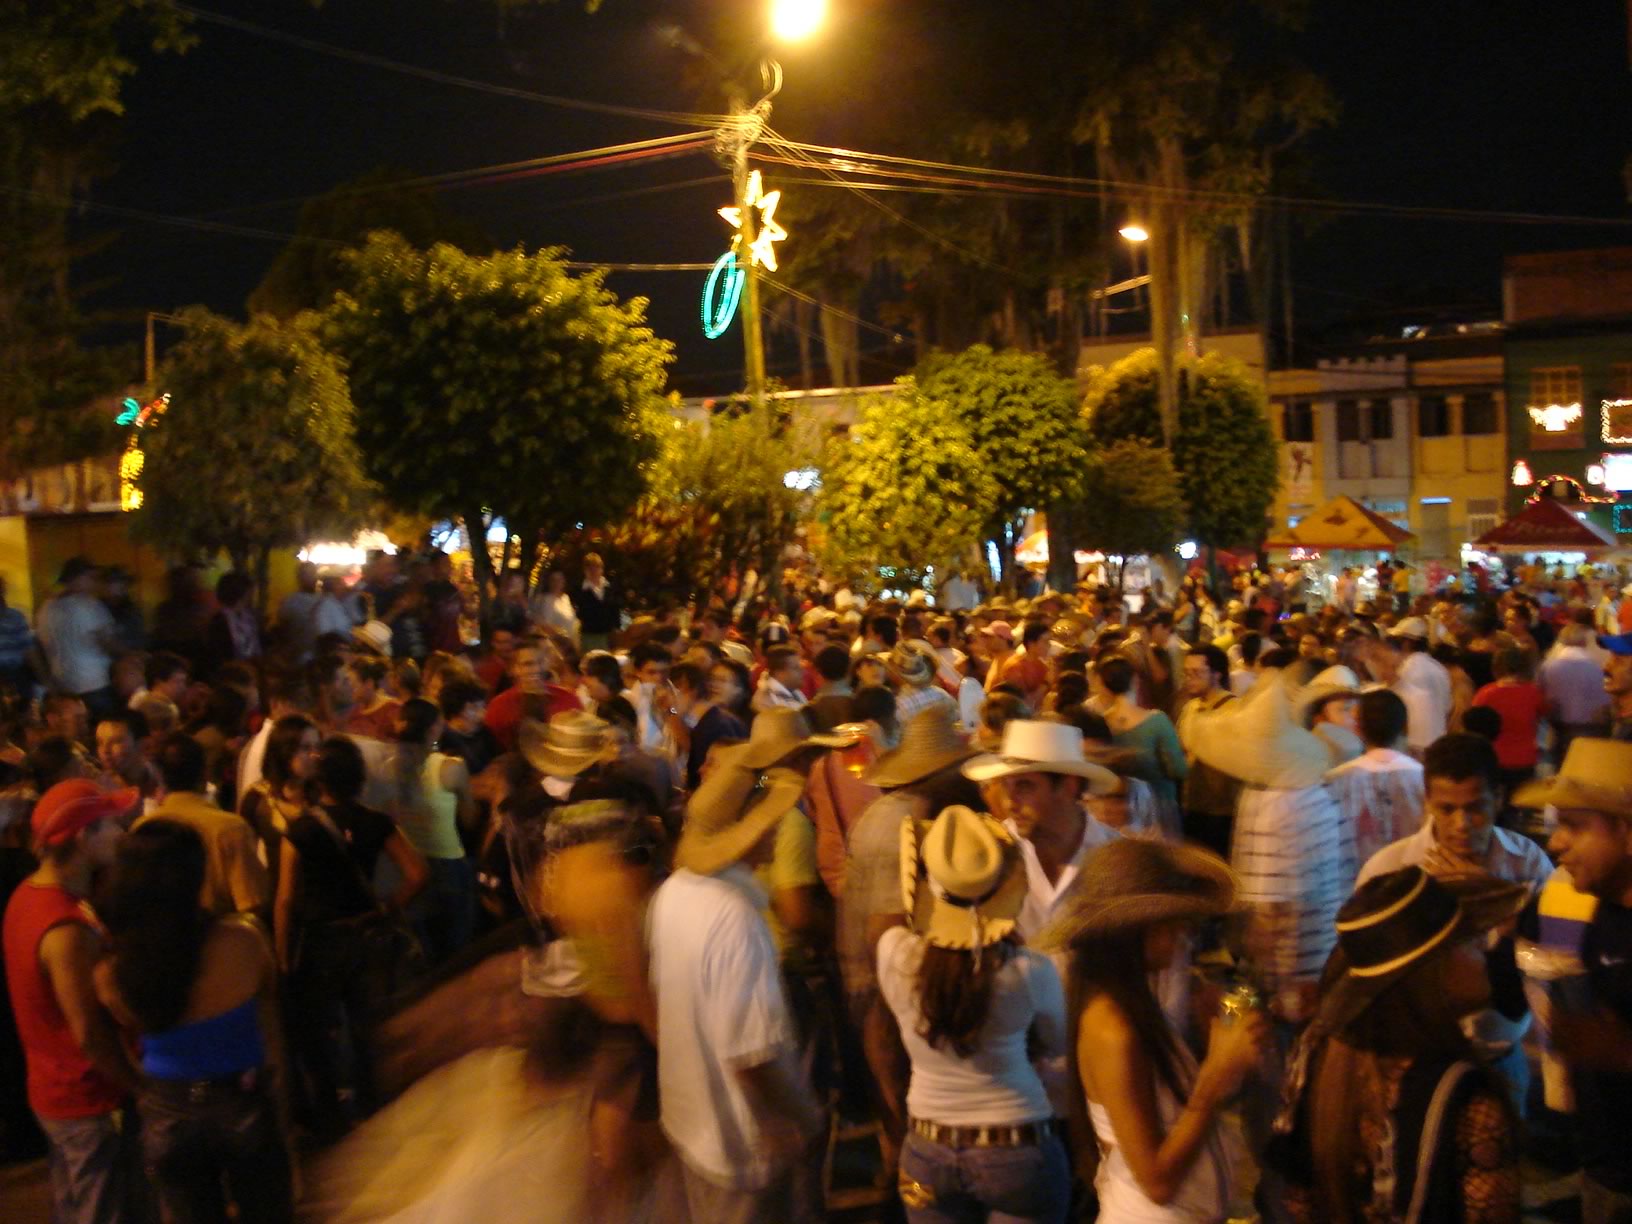 many people stand in a crowd during a festival